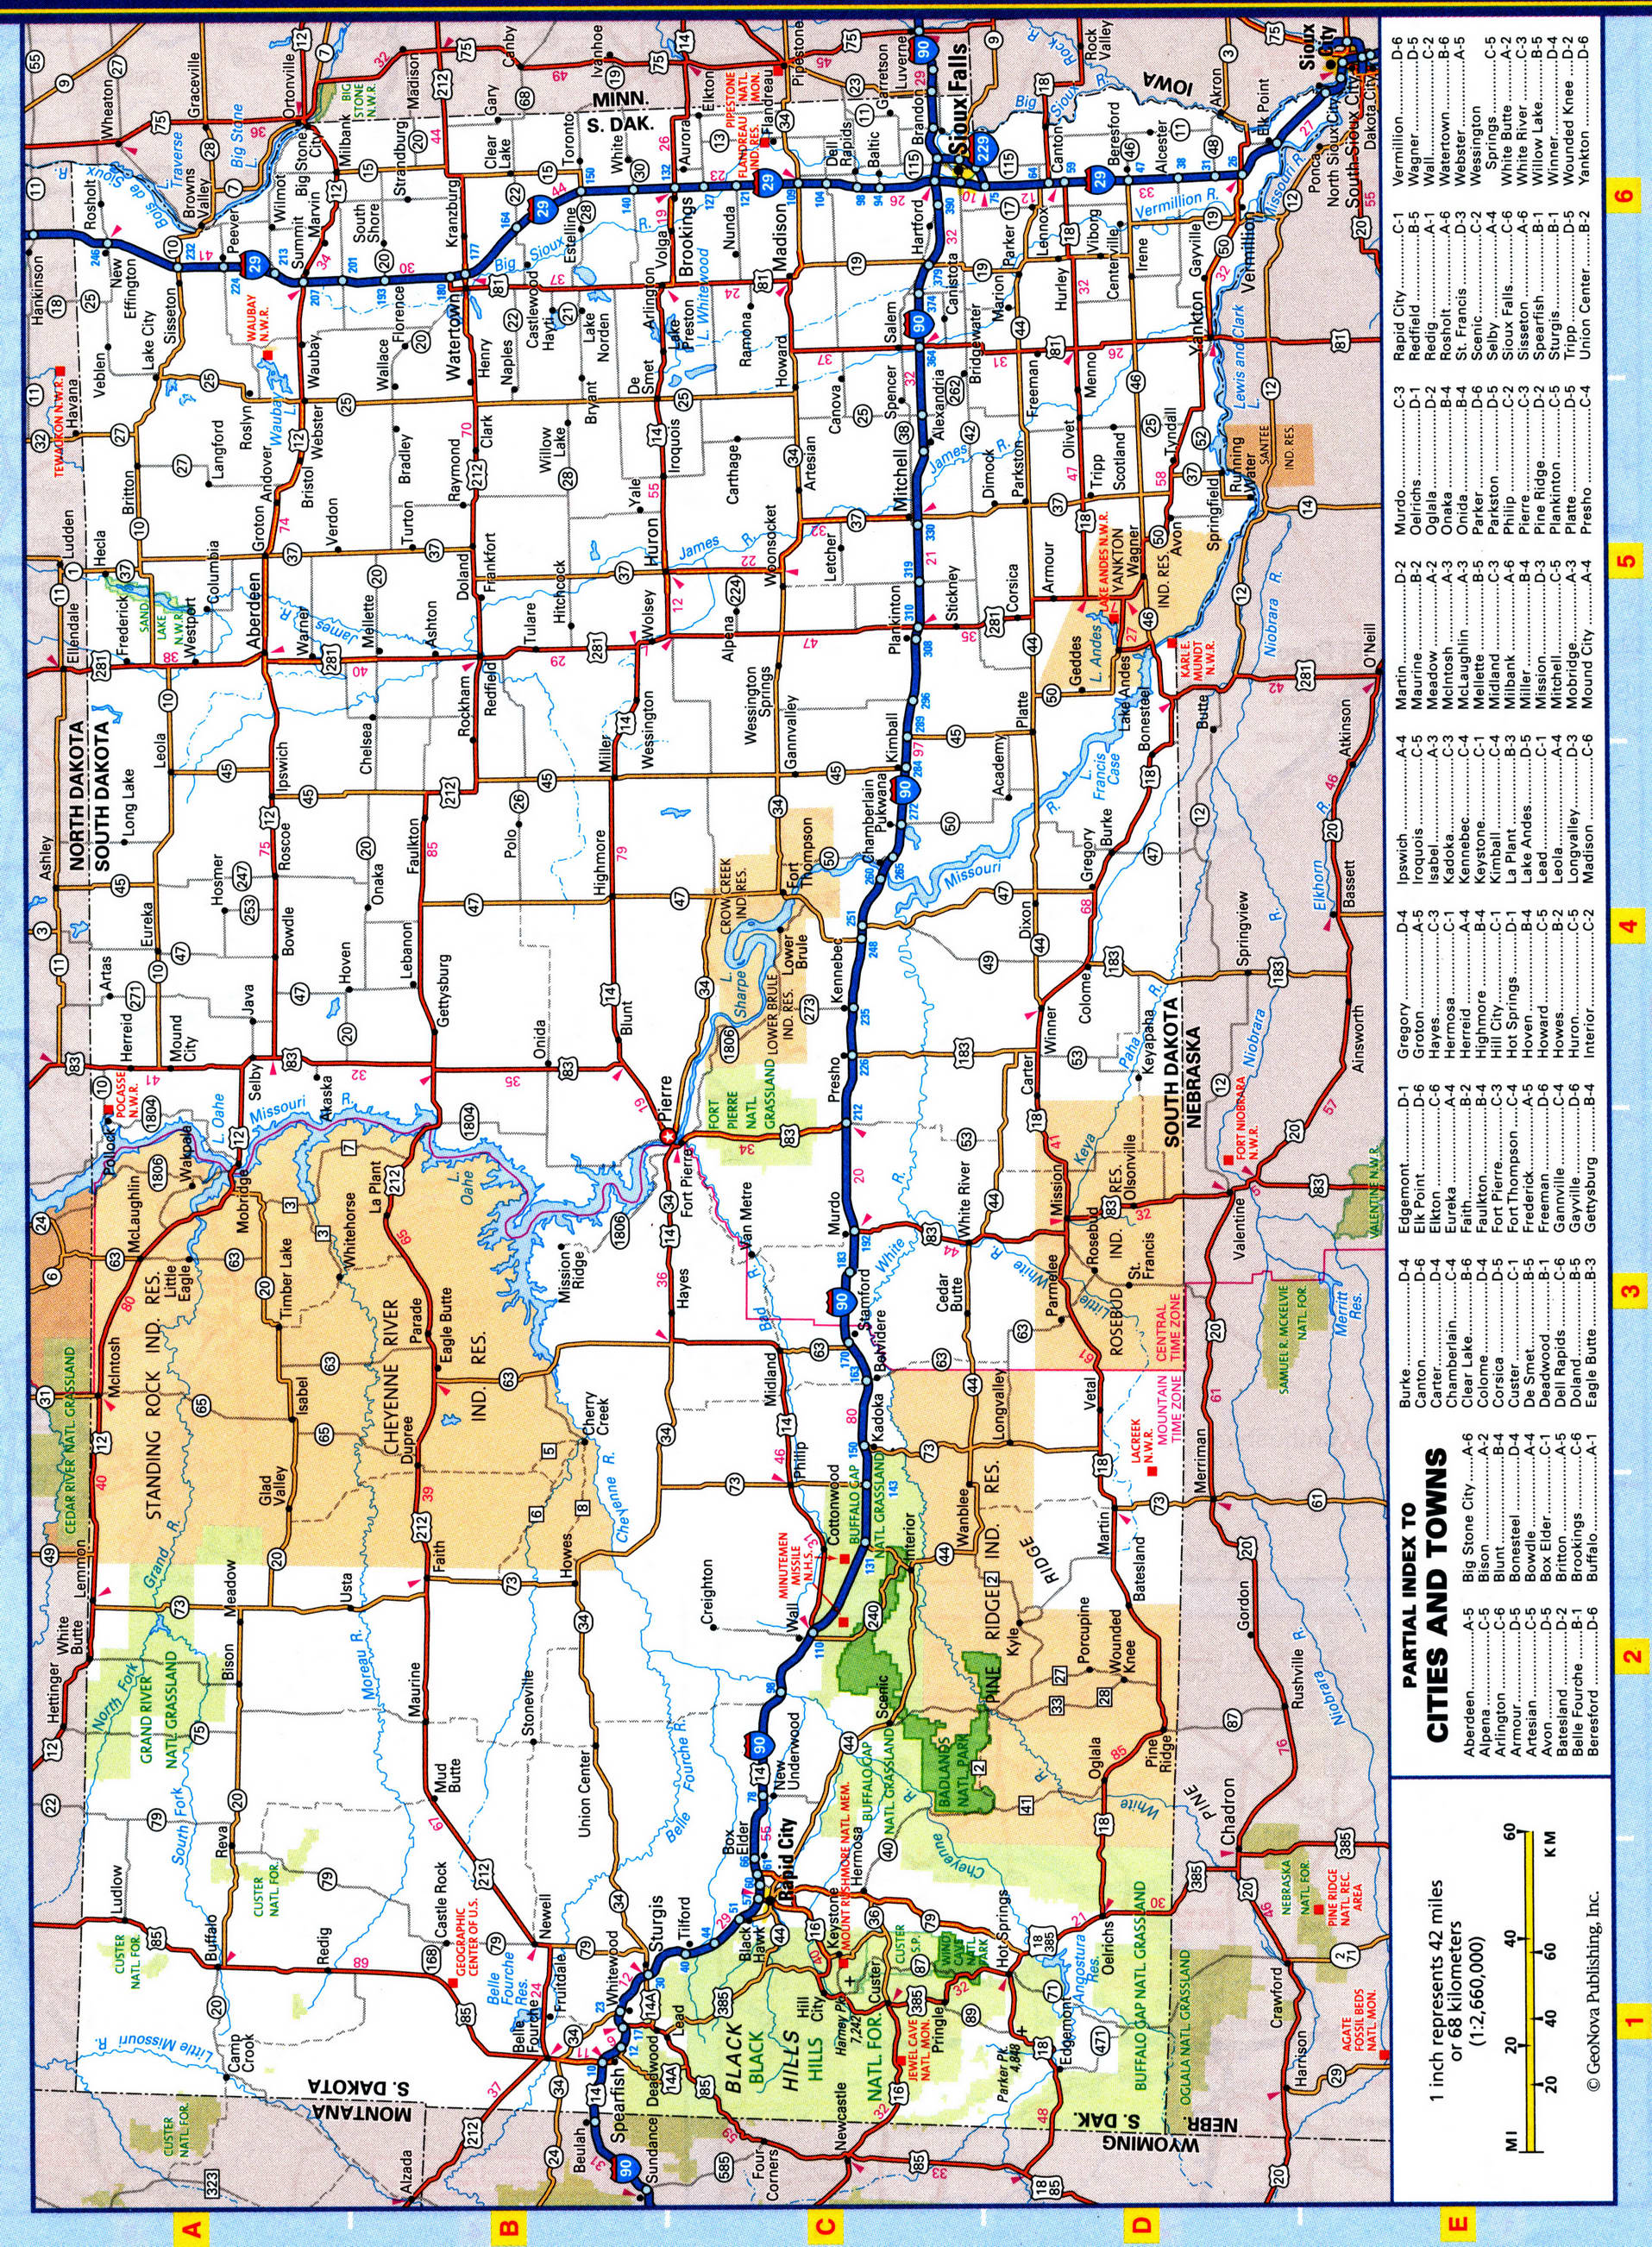 South Dacota highway map